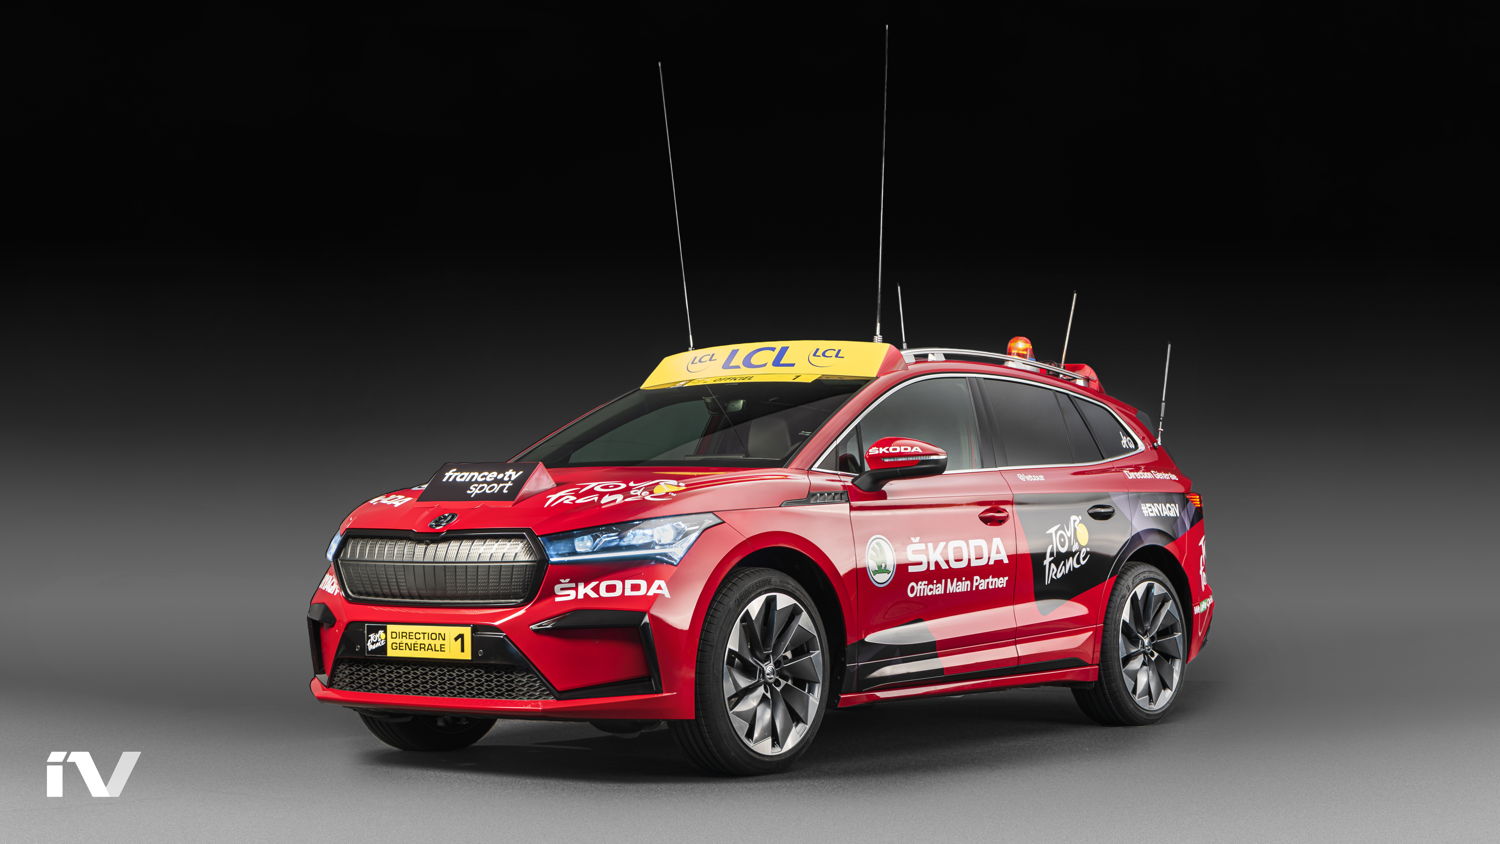 The ŠKODA ENYAQ iV will be demonstrating its sporting qualities as the lead vehicle (&#x27;Red Car&#x27;) of the Tour de France starting tomorrow. The first ŠKODA model based on the modular electrification toolkit (MEB) has been kitted out for its role as the &#x27;mobile control centre&#x27; for Tour Director Christian Prudhomme.